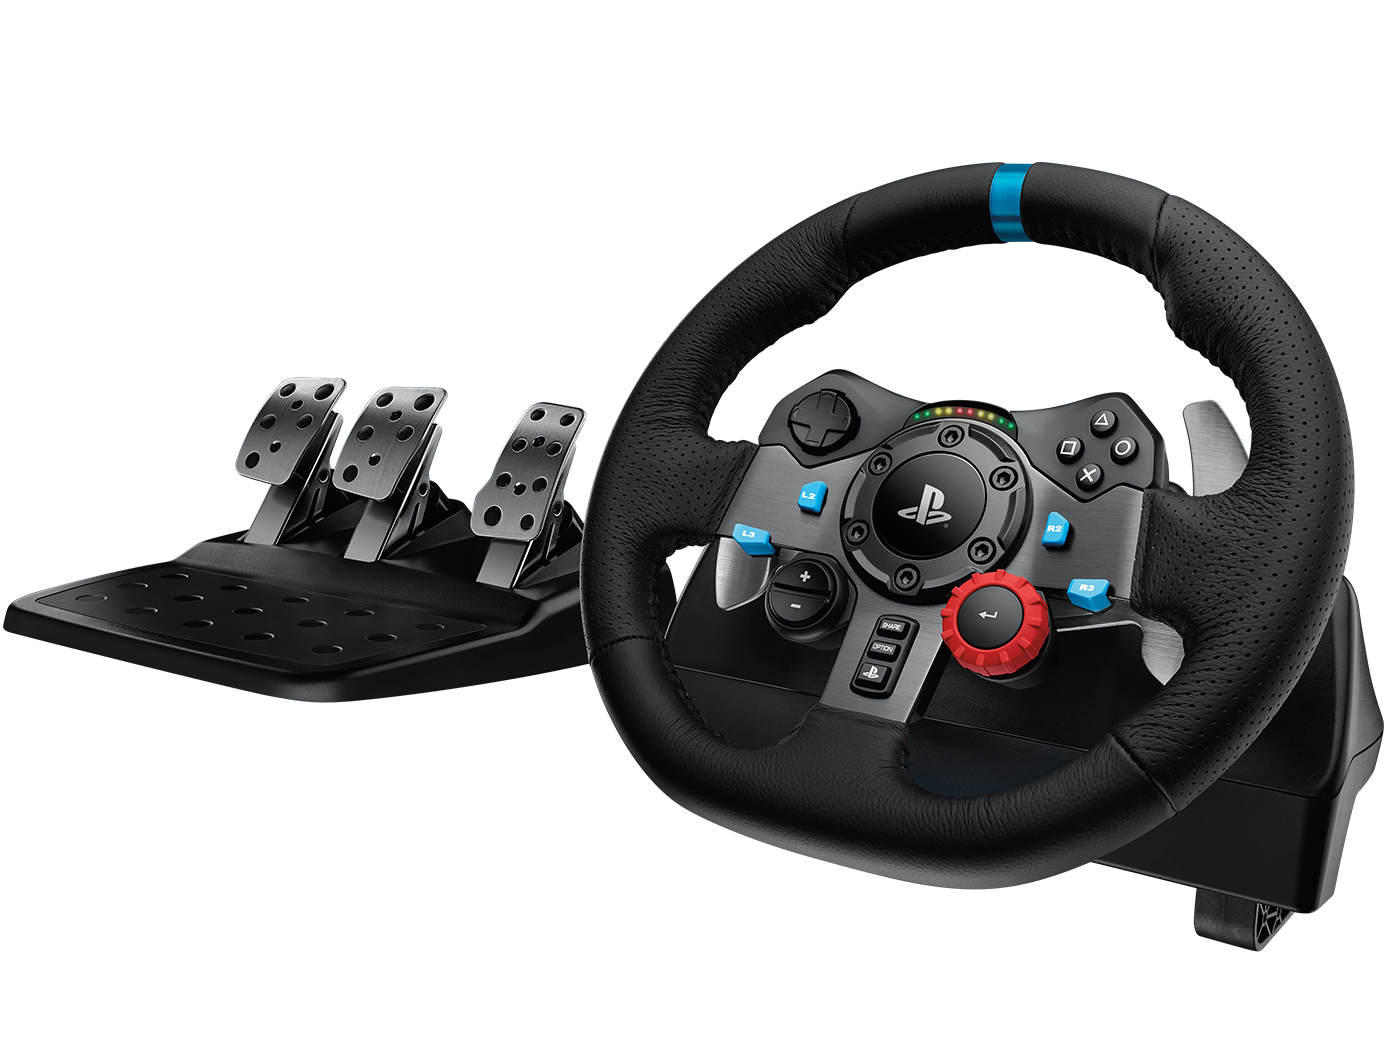 Logitech G29 Racing Wheel for PlayStation and PC